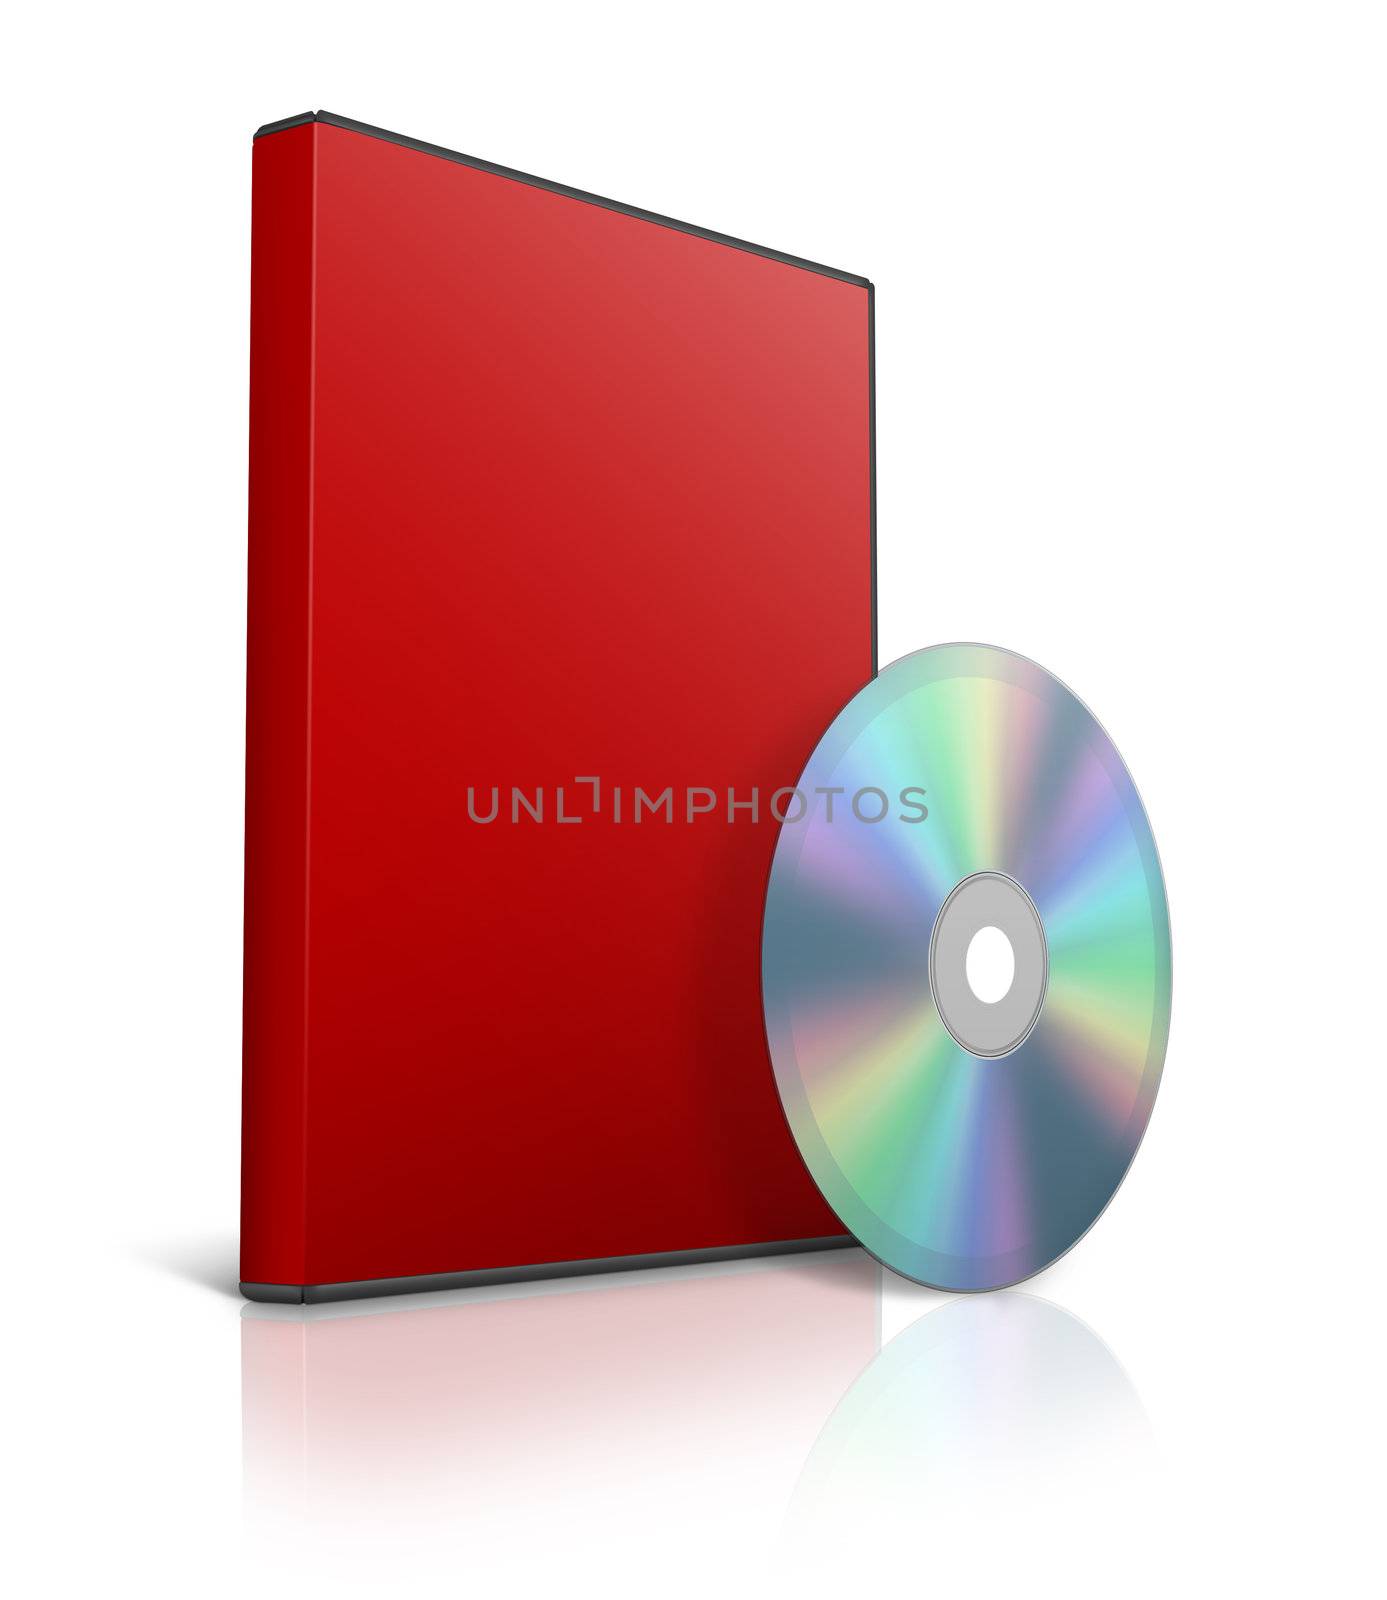 software DVD case and disk isolated on white background